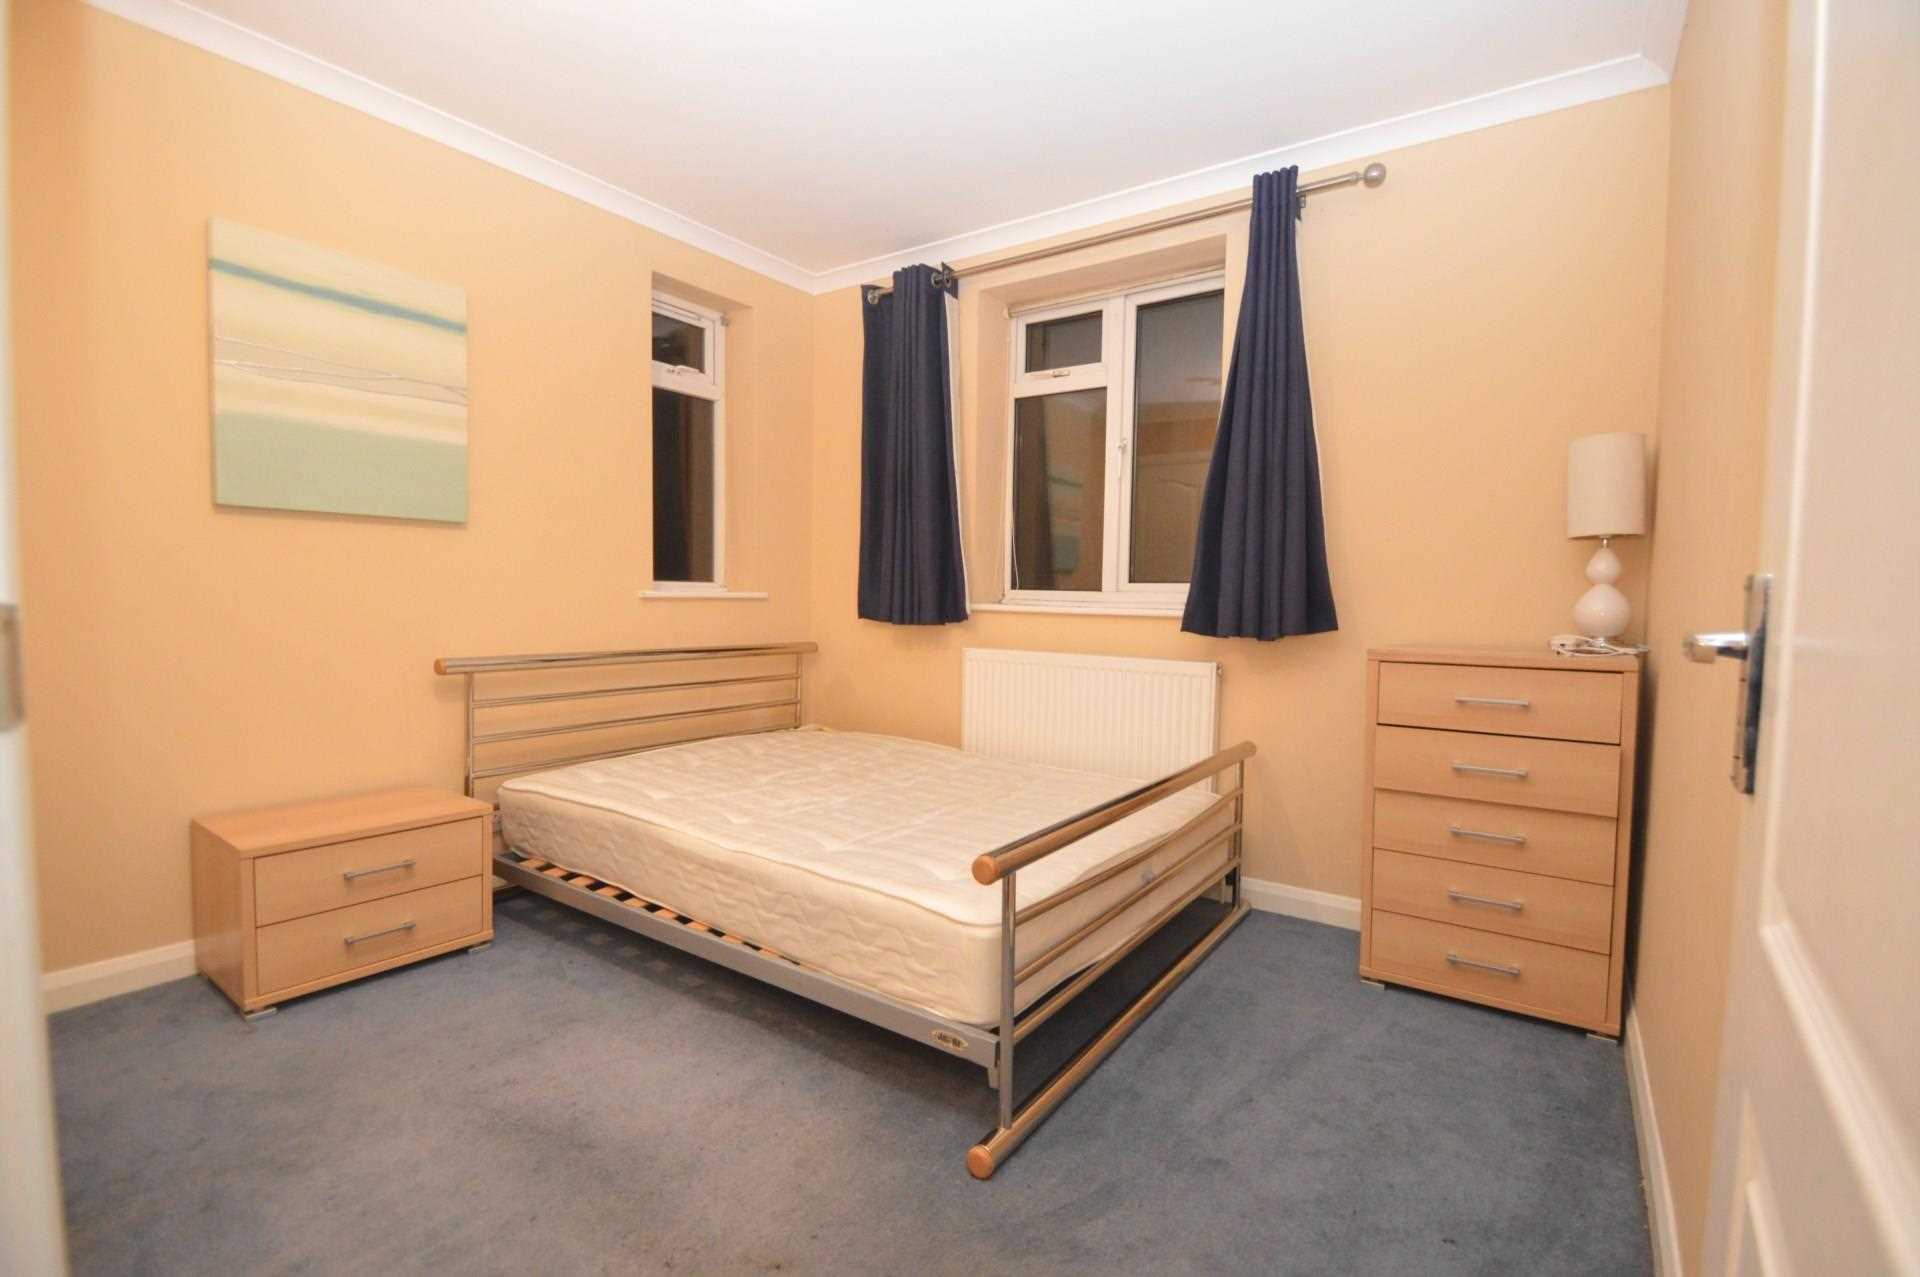 0 bed Room for rent in Ottershaw. From Premier Lettings